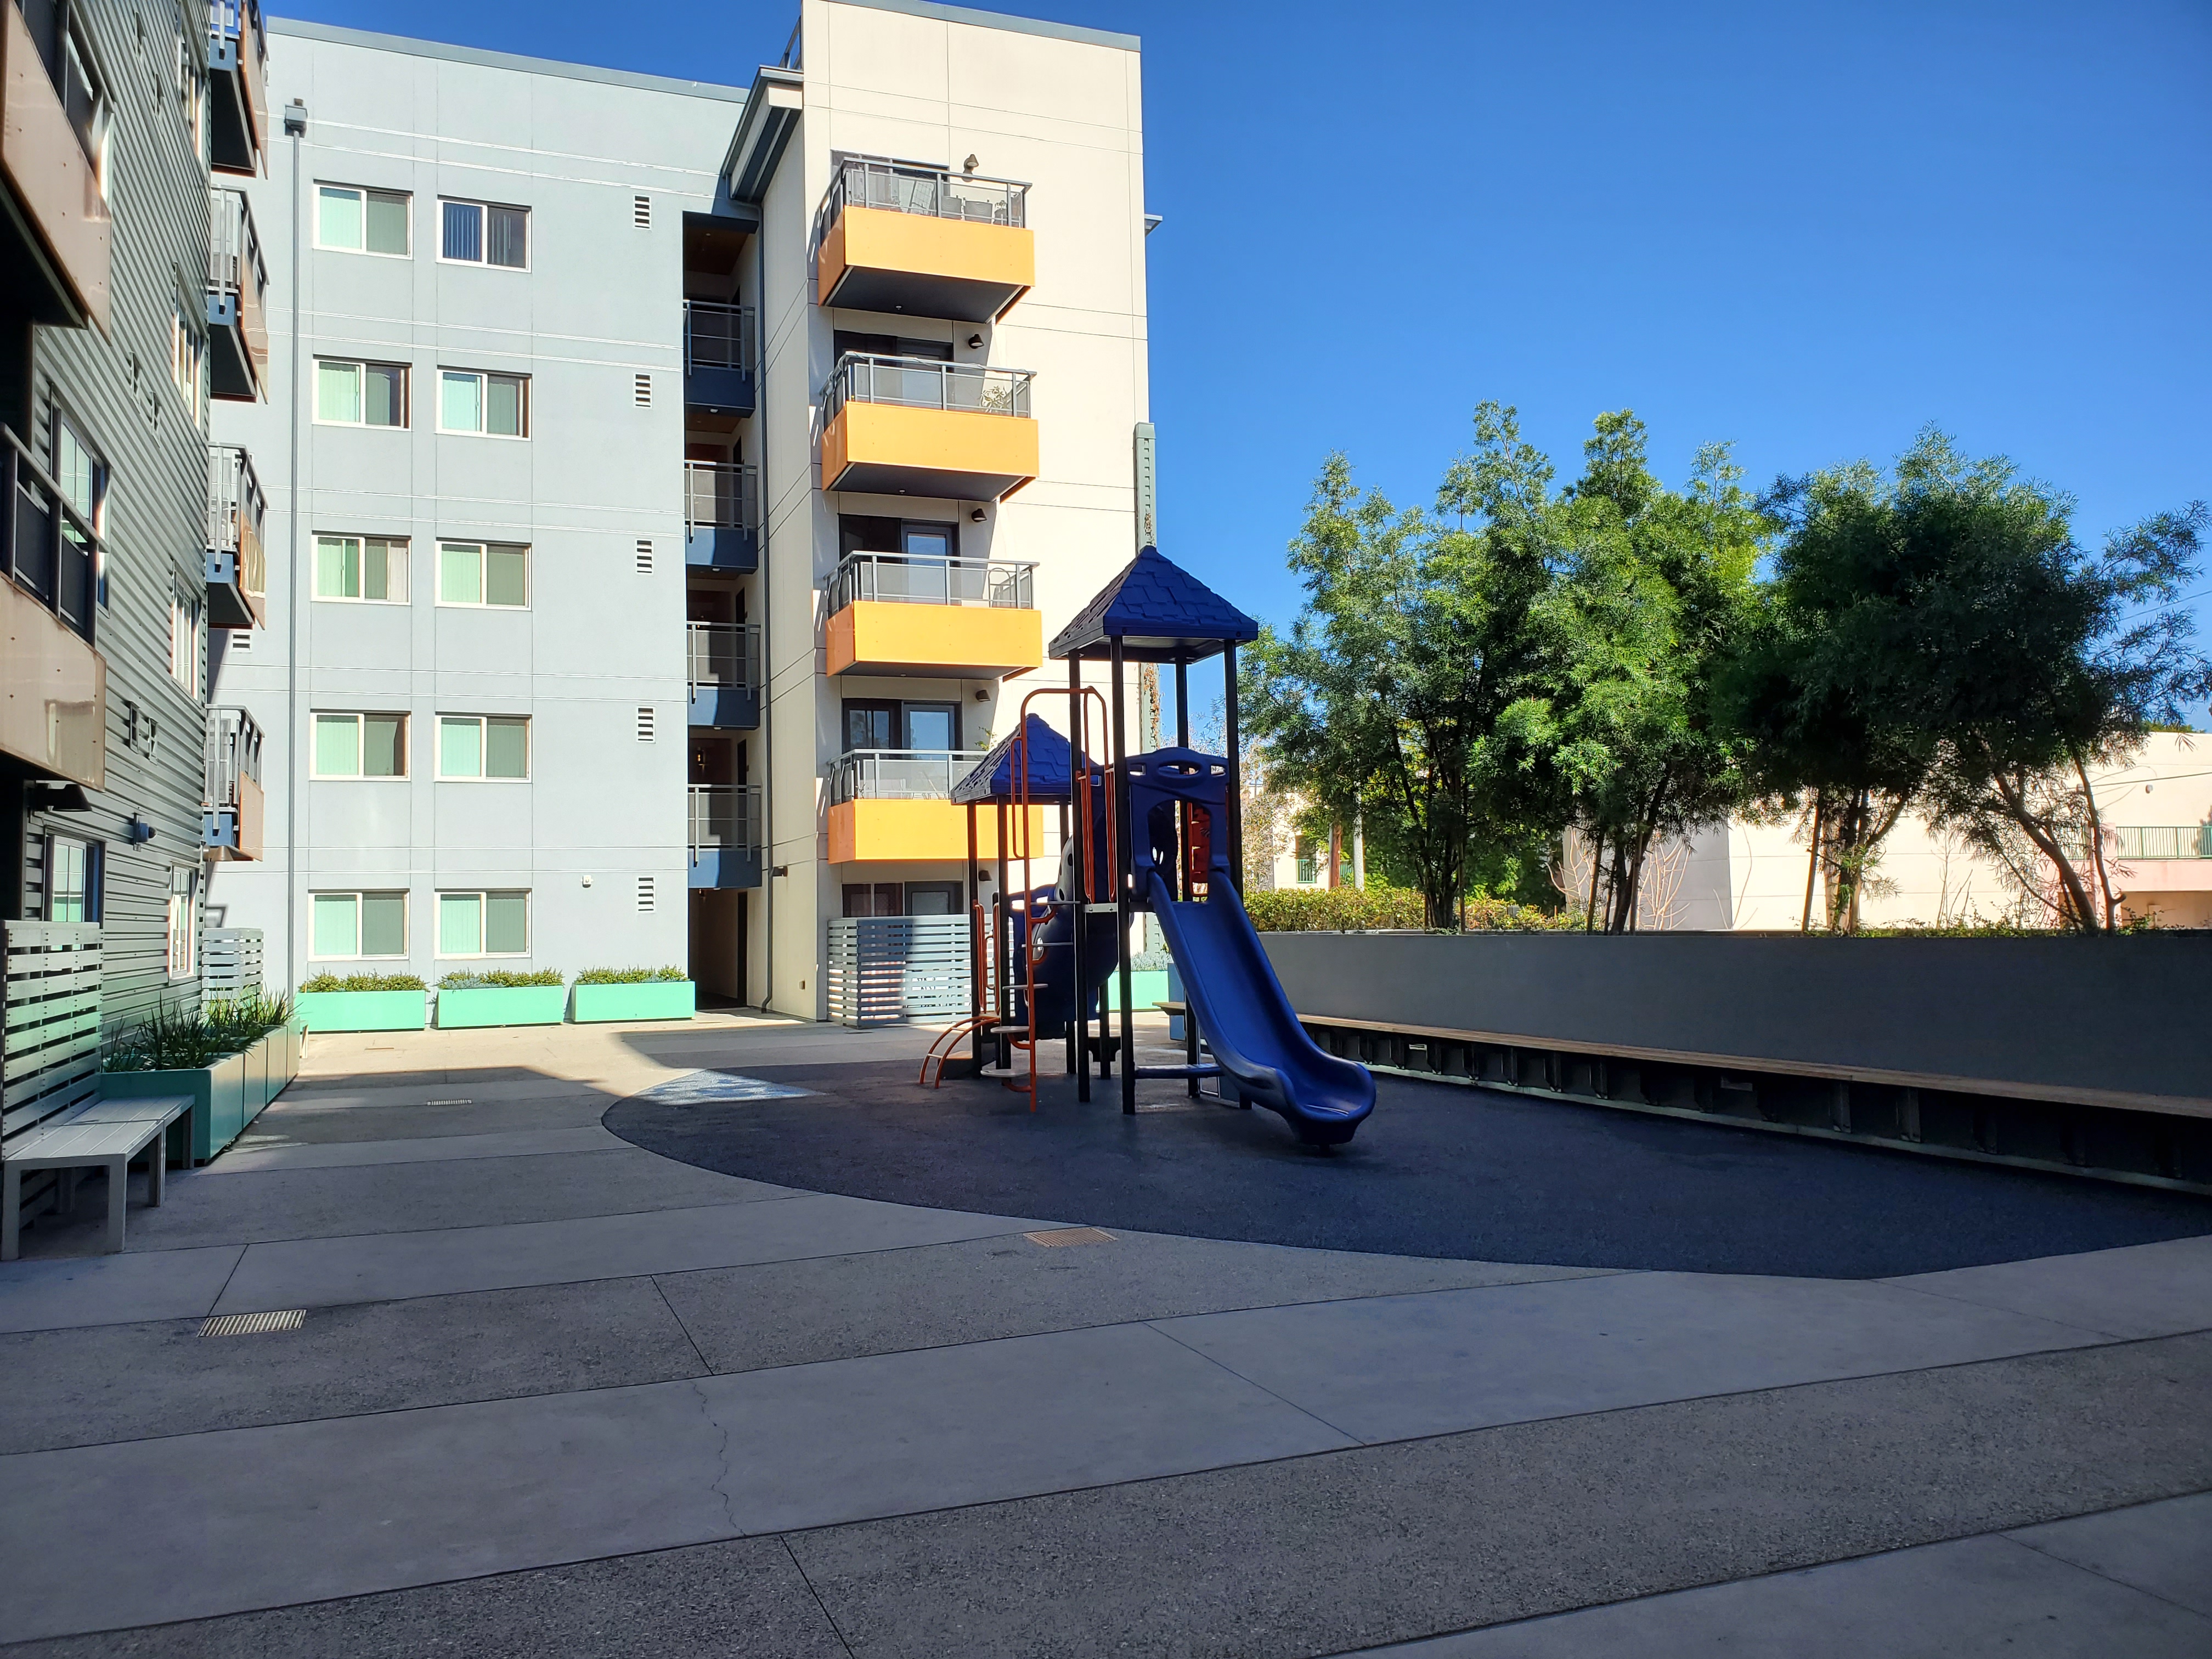 Exterior view of the Selma Community Housing, 5 story building with a small playgroung